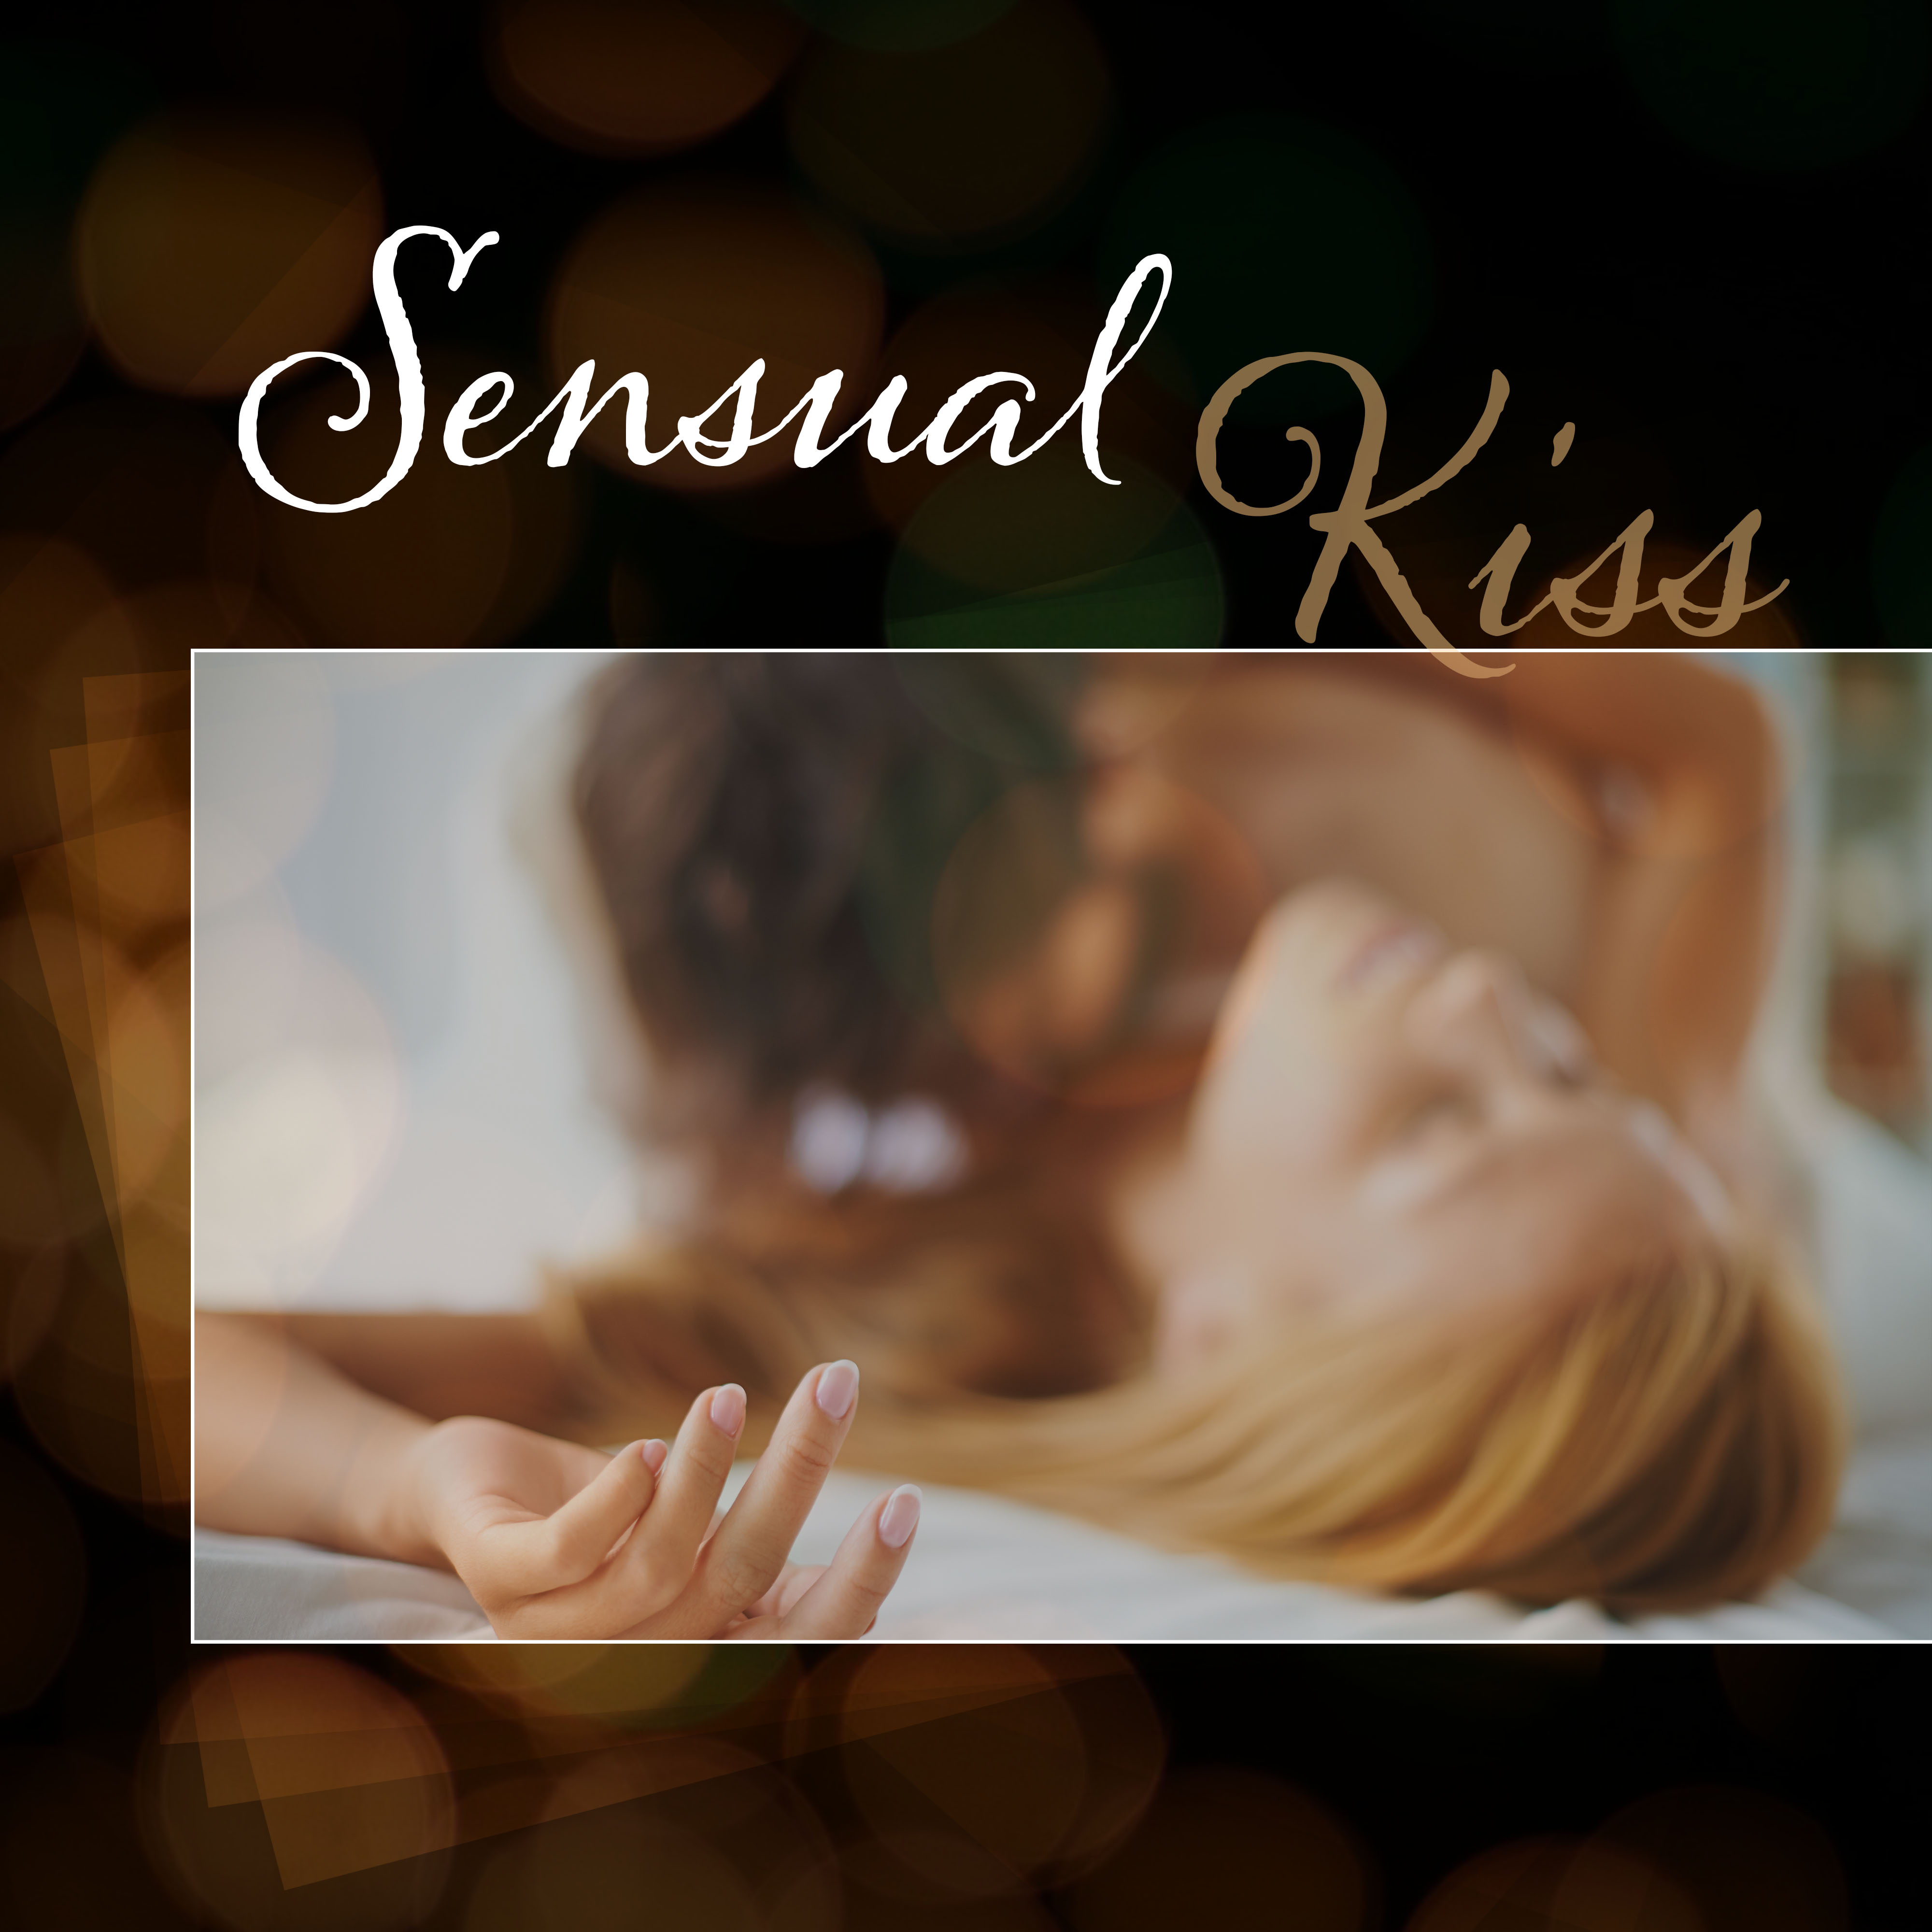 Sensual Kiss  Smooth Jazz for Lovers, True Love, Pure Relaxation, Romantic Evening, Dinner by Candlelight, Mellow Jazz